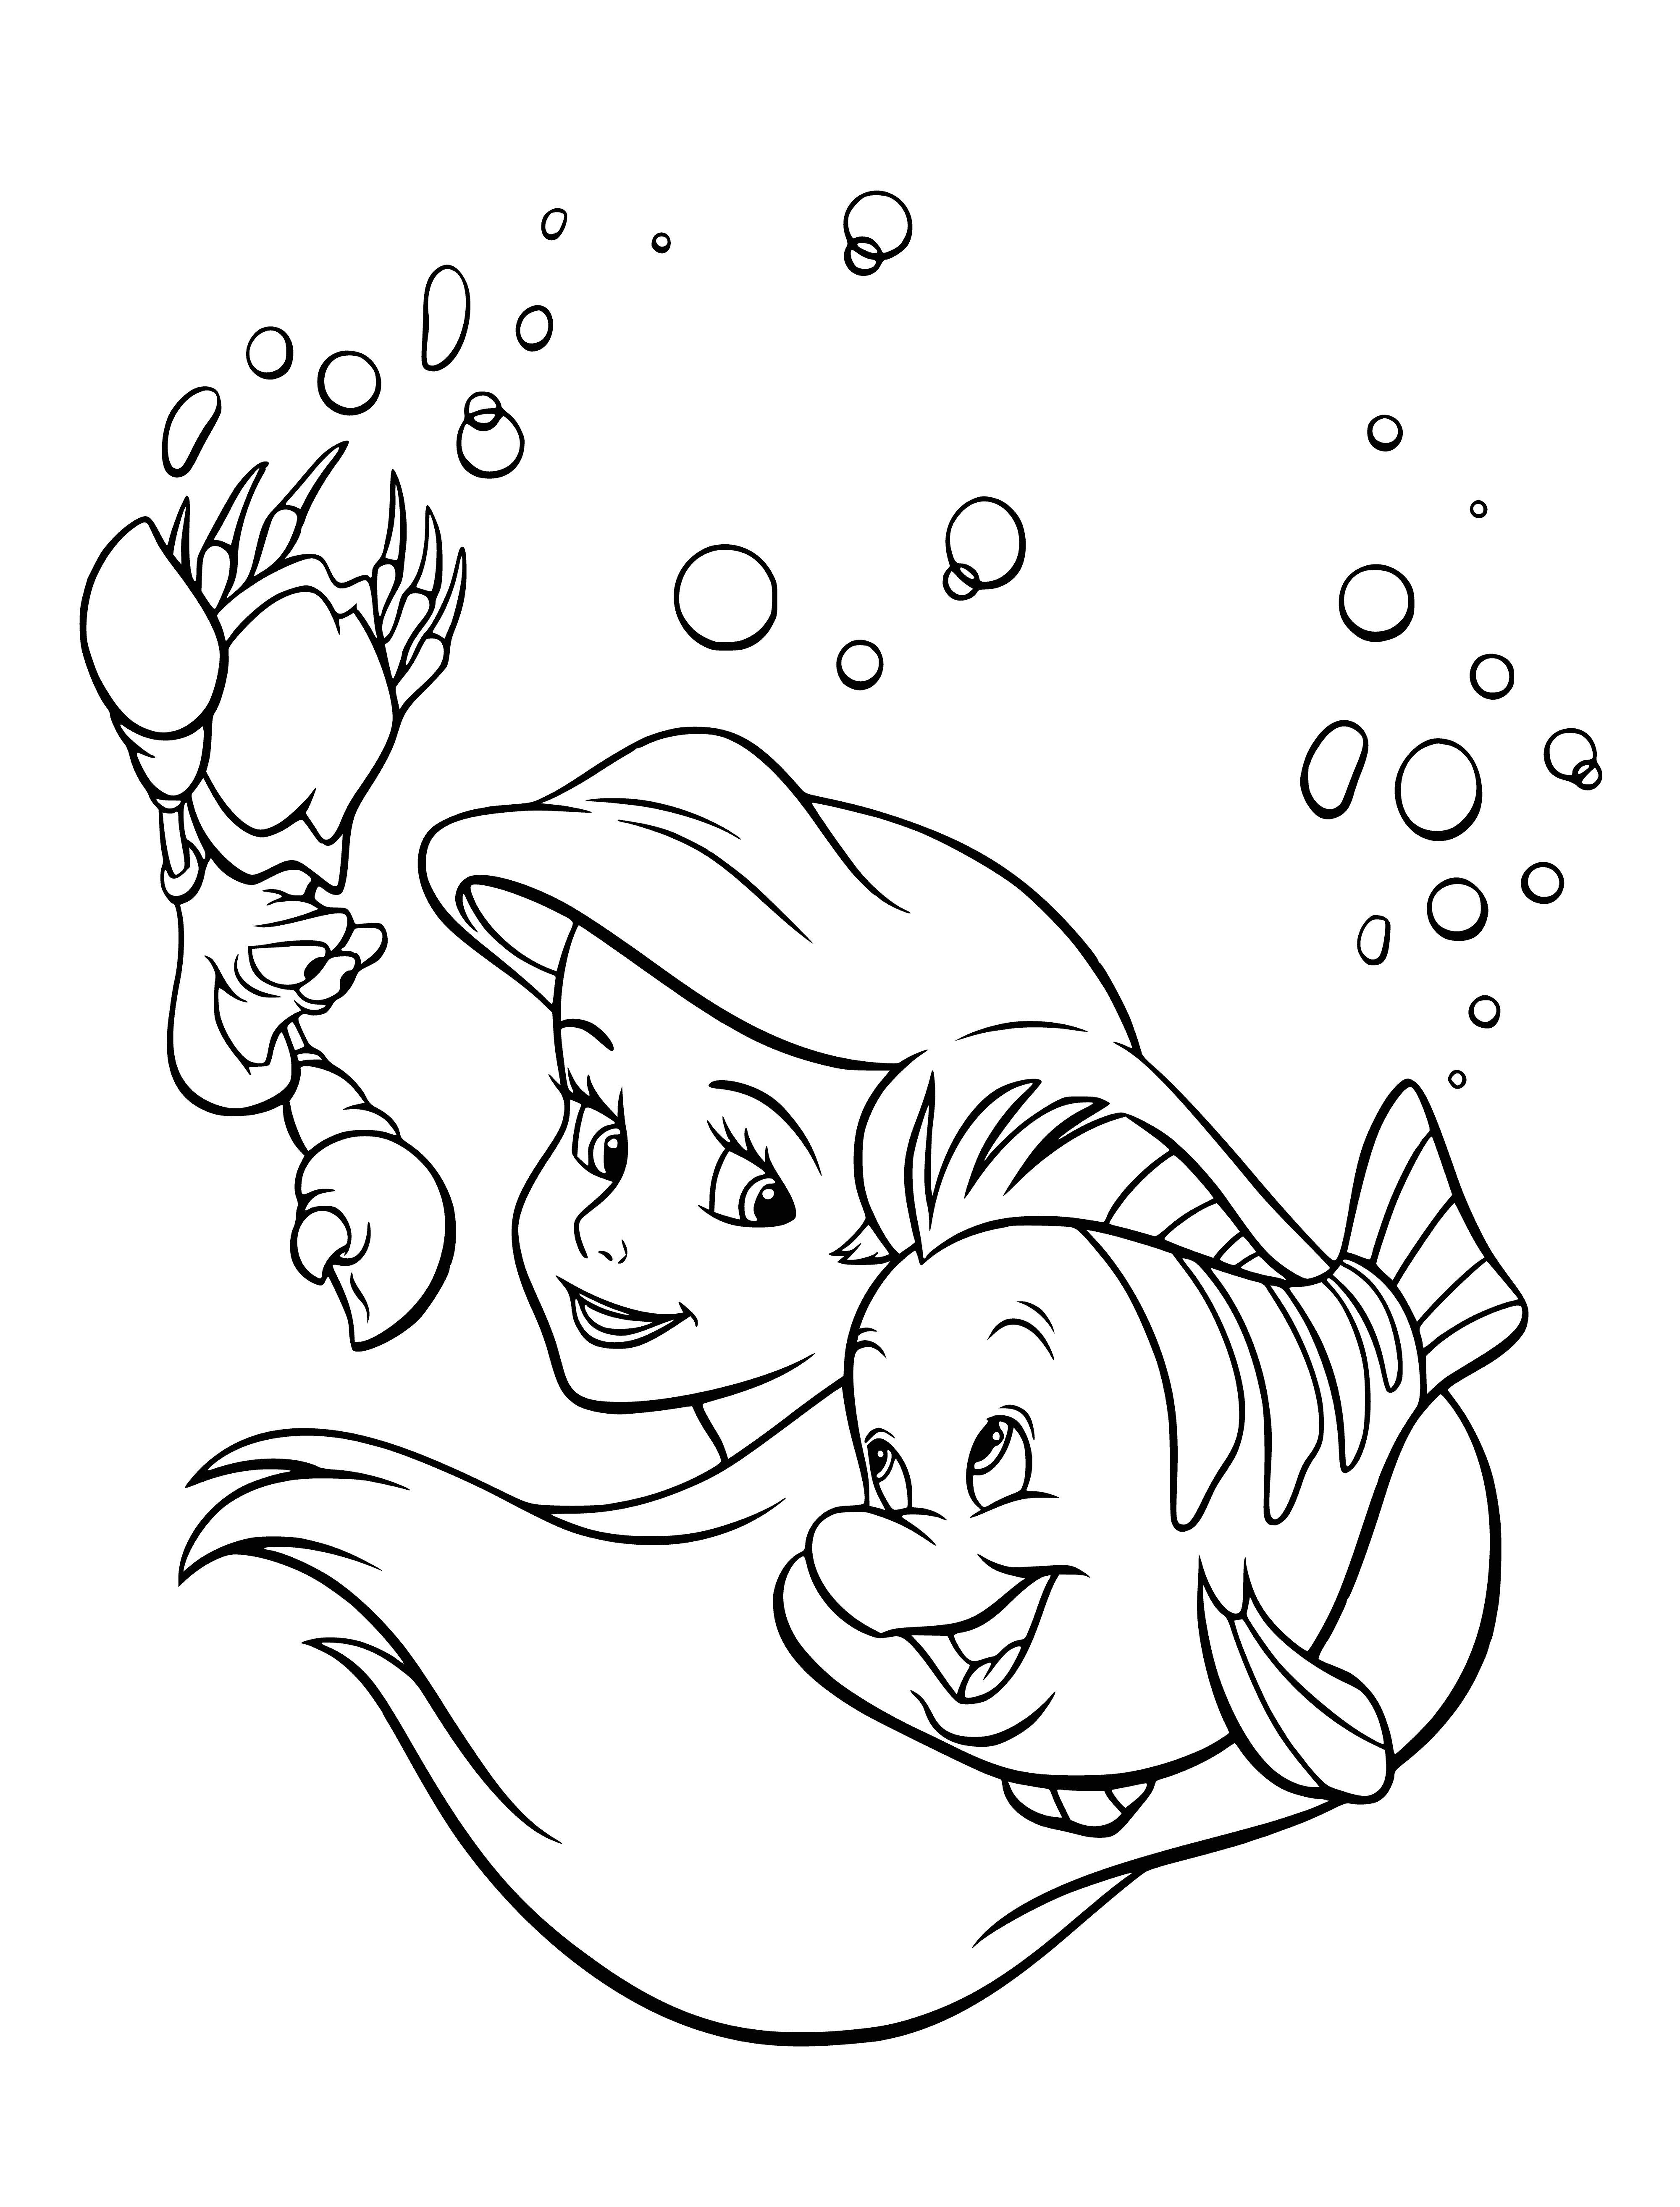 Ariel with friends coloring page